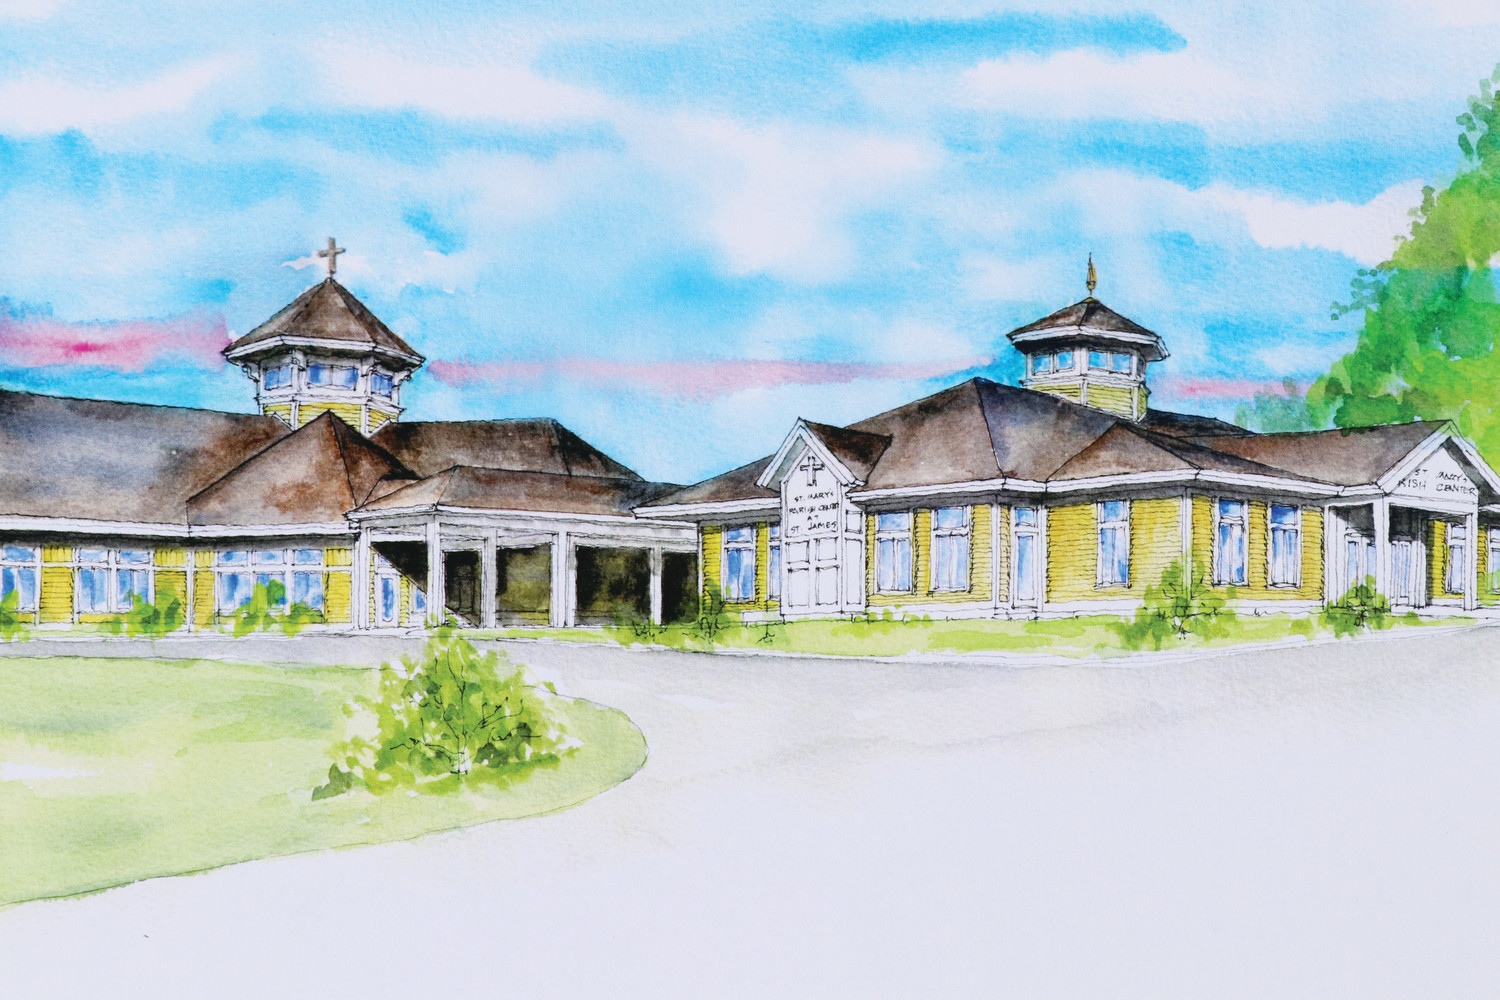 The architect’s rendering of what the new St. James Parish Center will look like once it’s built later this year. The 4,800 square foot addition will house classroom and gathering space for parishioners.